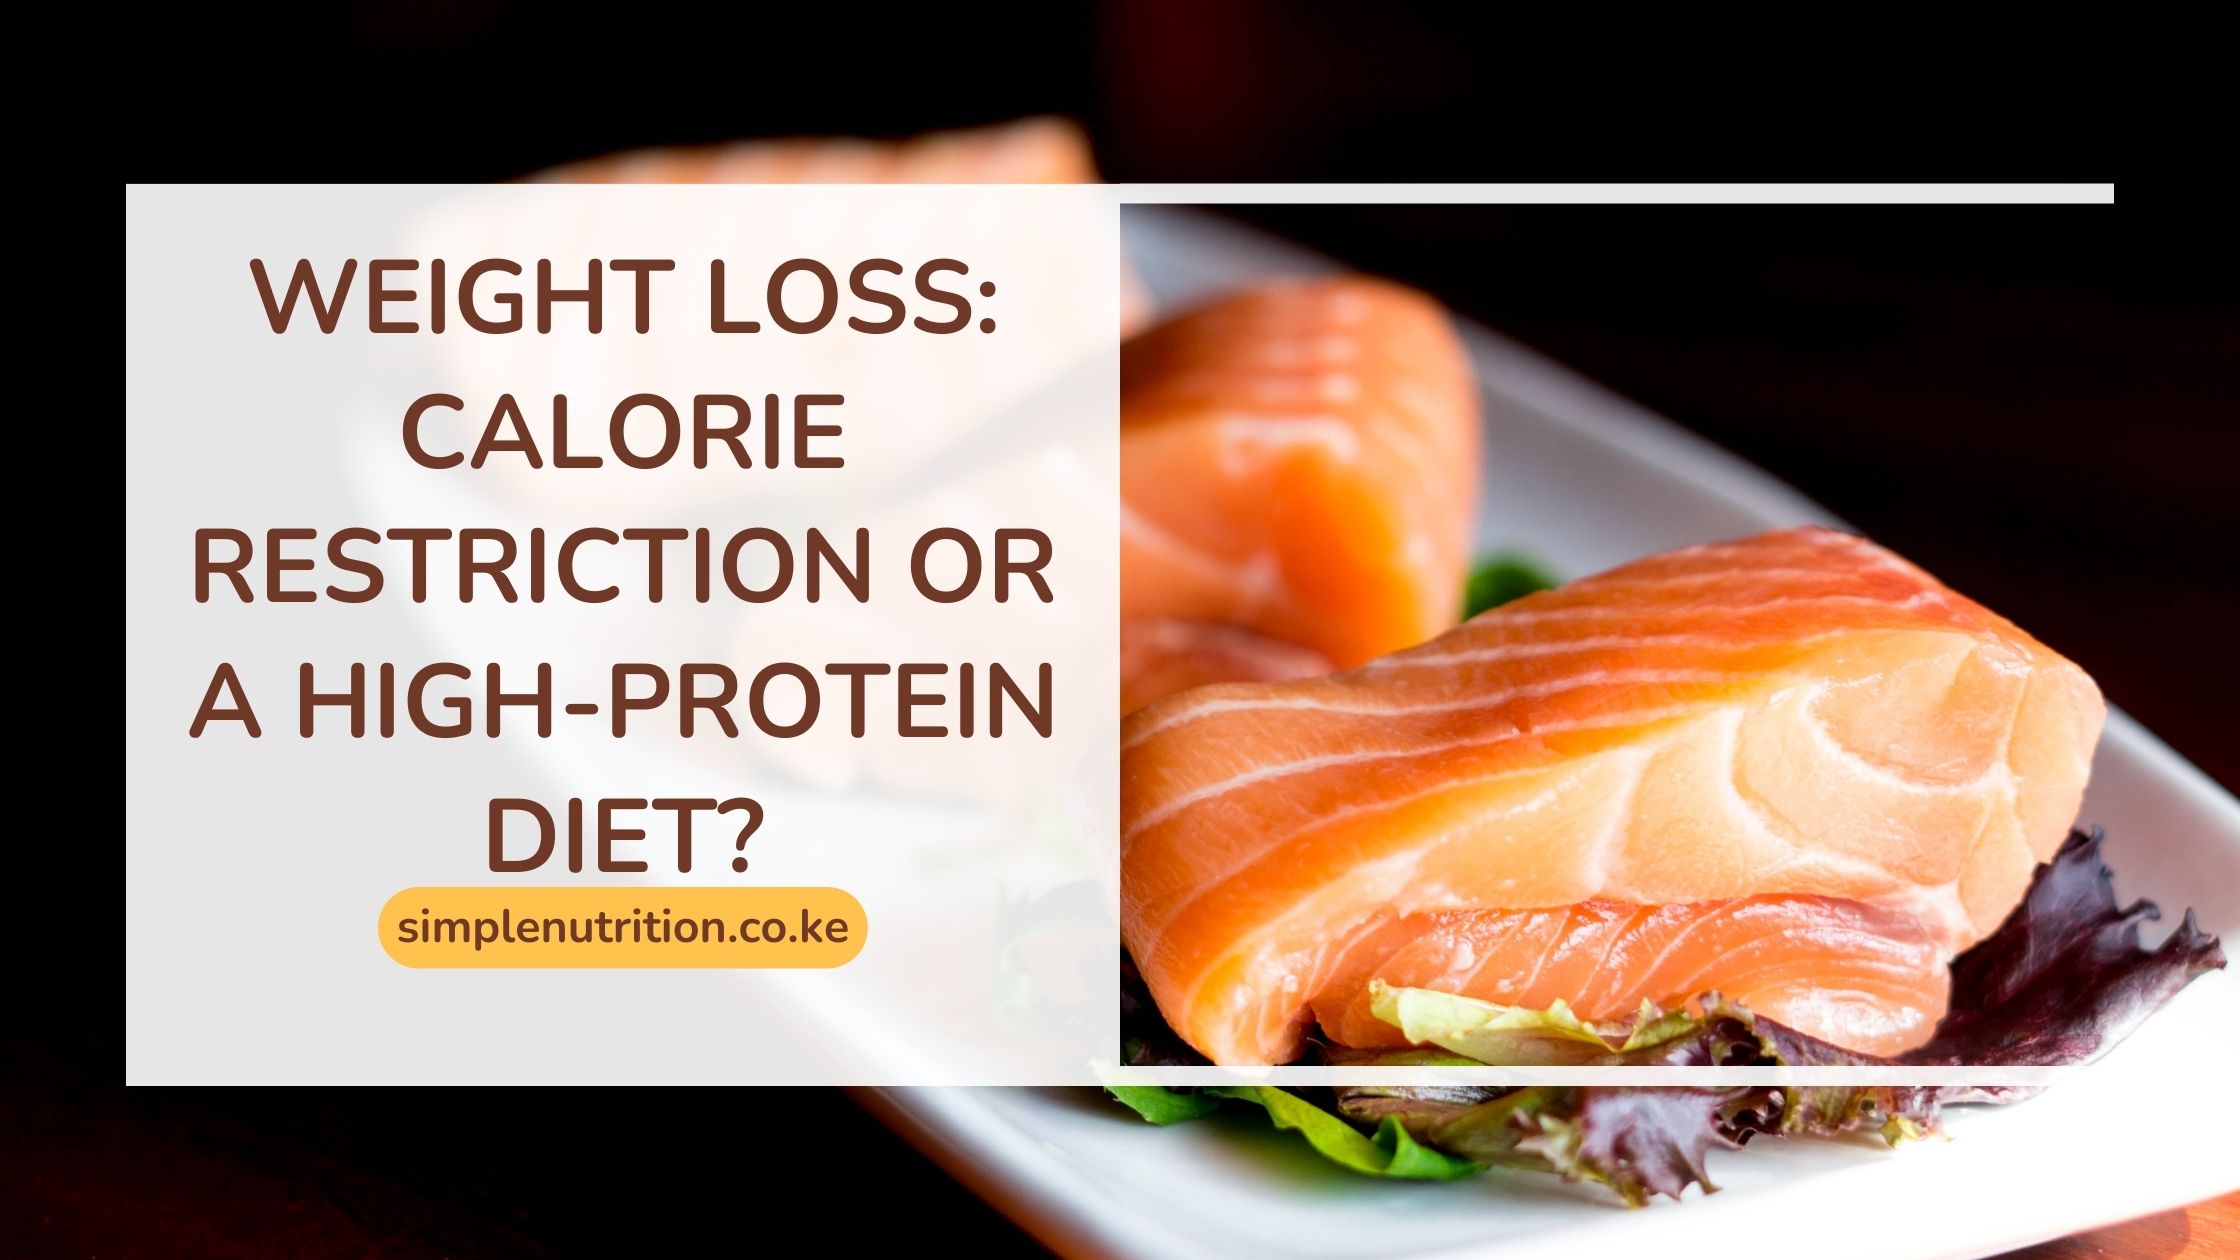 Weight loss: calorie restriction or a high-protein diet?